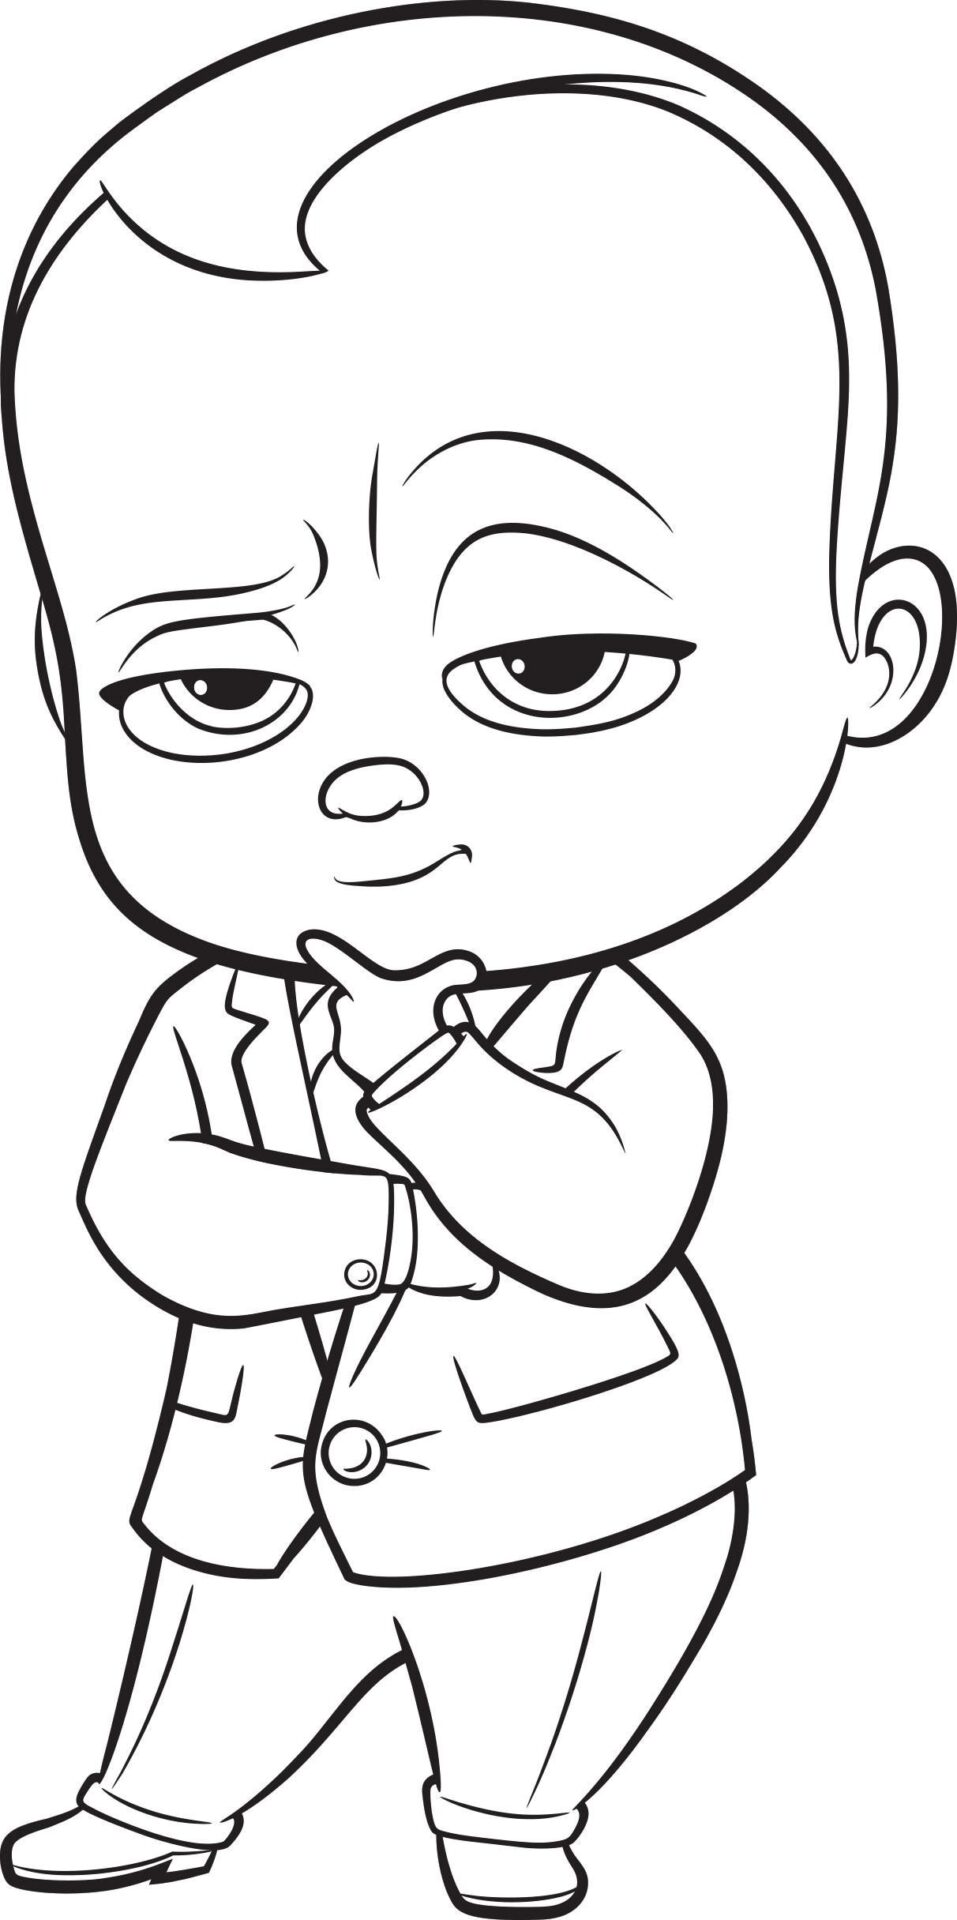 Cool Boss Baby Coloring Page   Free Printable Coloring Pages for Kids